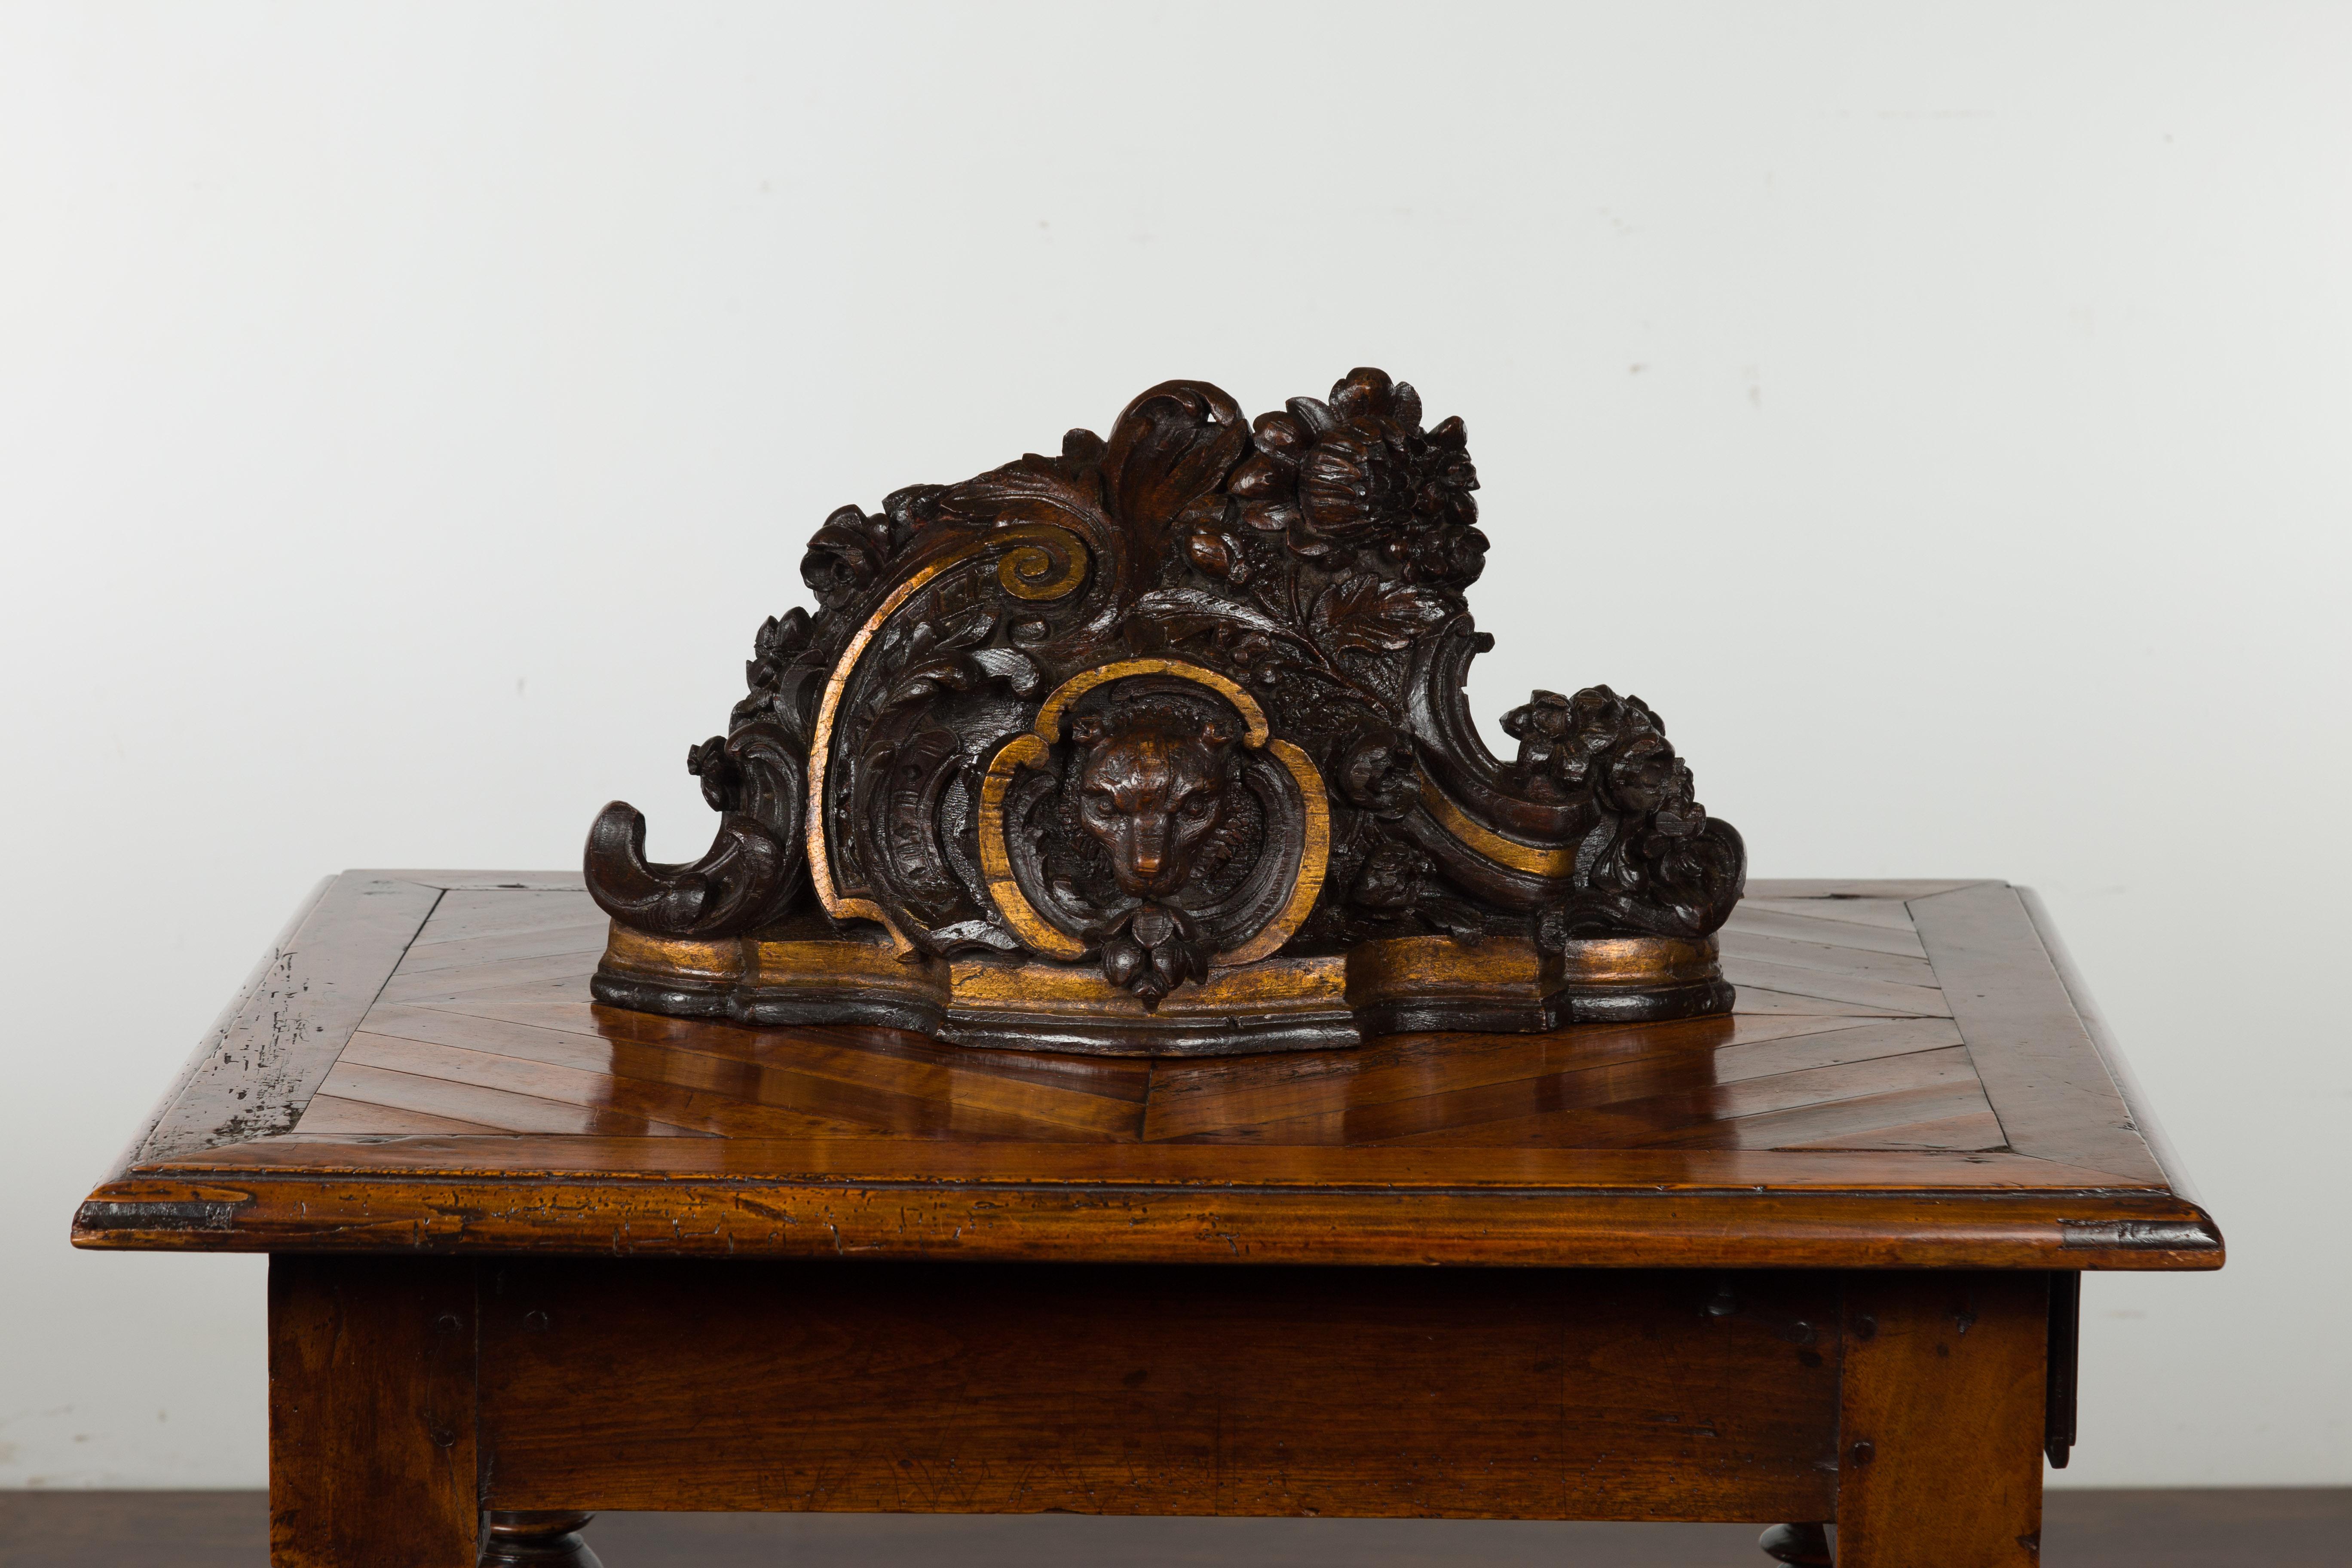 A Black Forest period carved wooden fragment from the early 20th century, with bear motif. hand carved in Switzerland during the turn of the century, this wooden fragment features a bear head in a scrolling cartouche, surrounded by delicate flowers